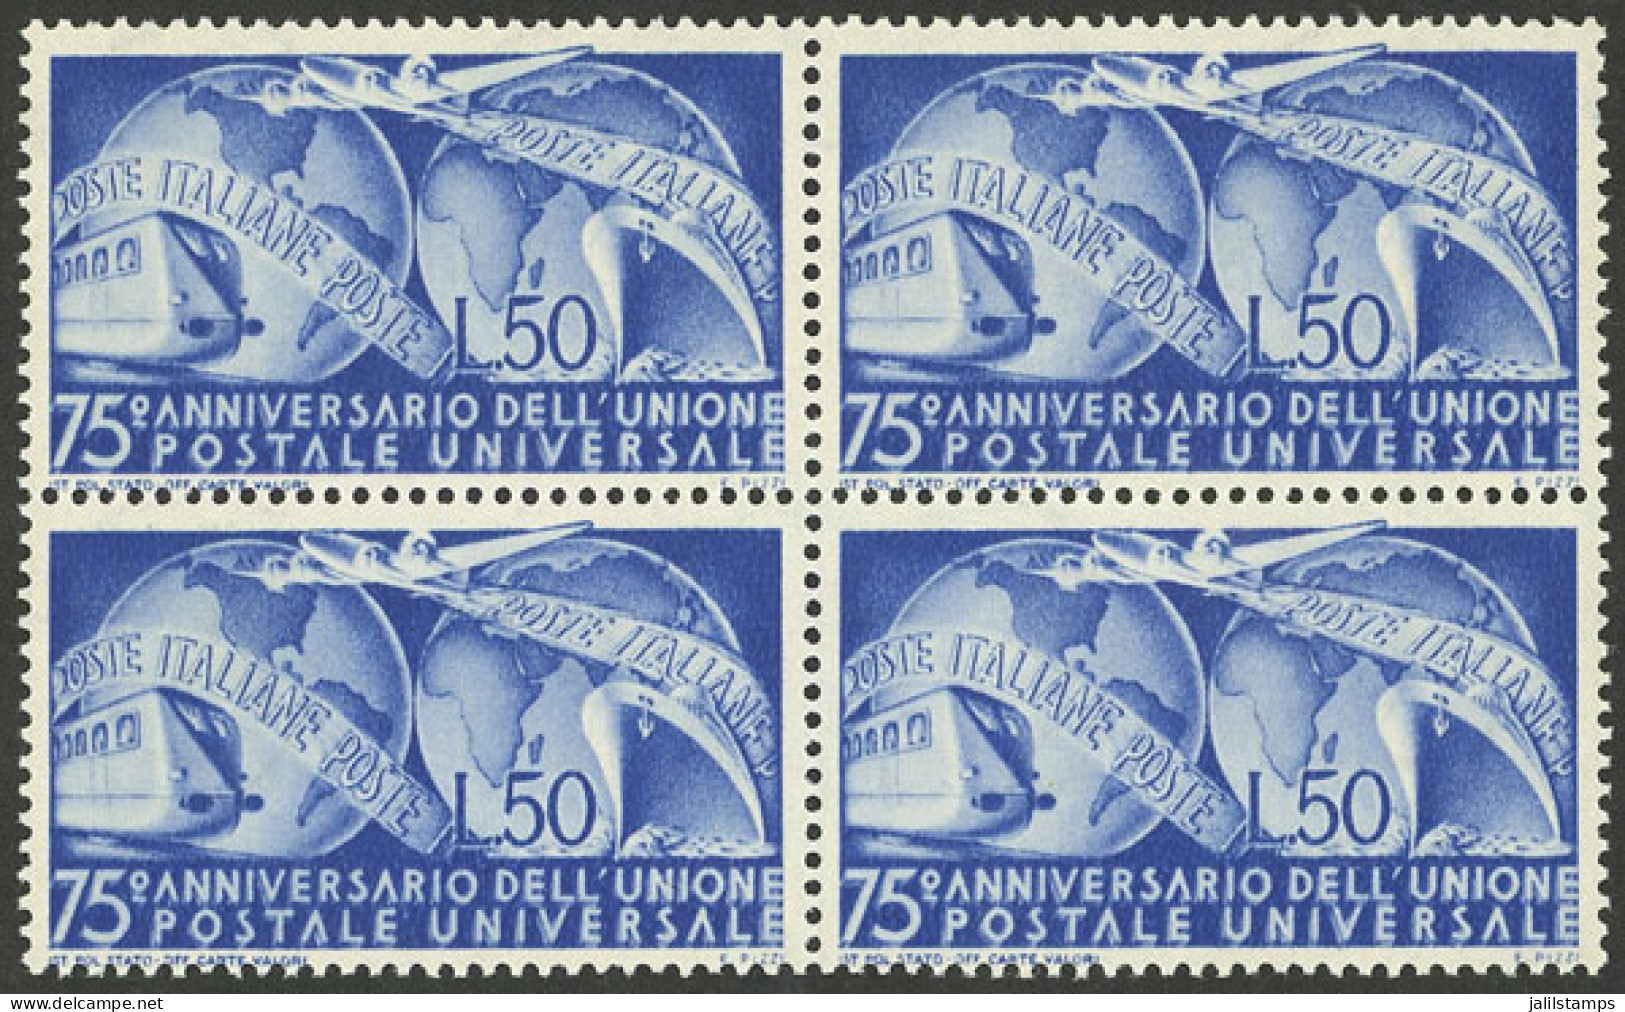 ITALY: Yvert 538, 1949 UPU, MNH Block Of 4, Very Fine Quality! - Unclassified